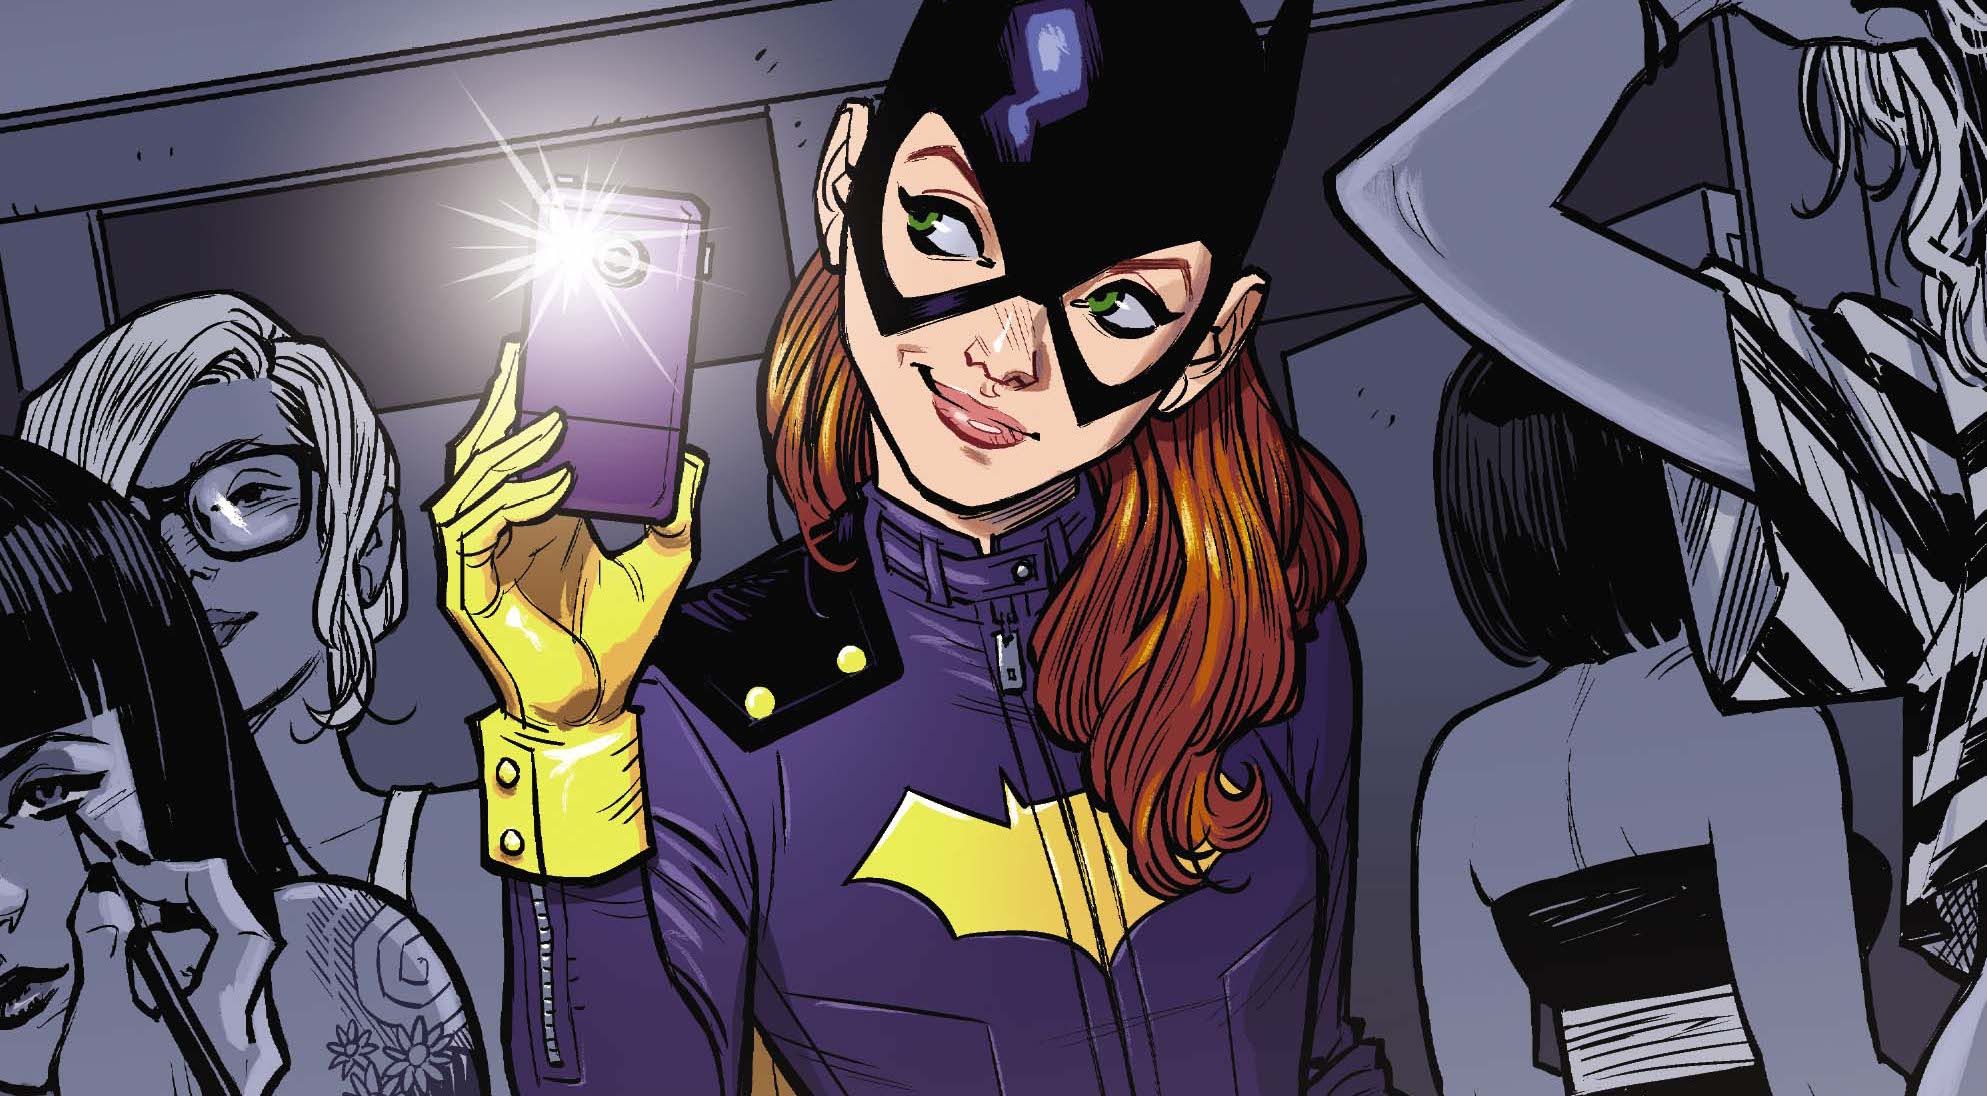 heroes-batgirl-movie-in-the-works-from-joss-whedon-collider